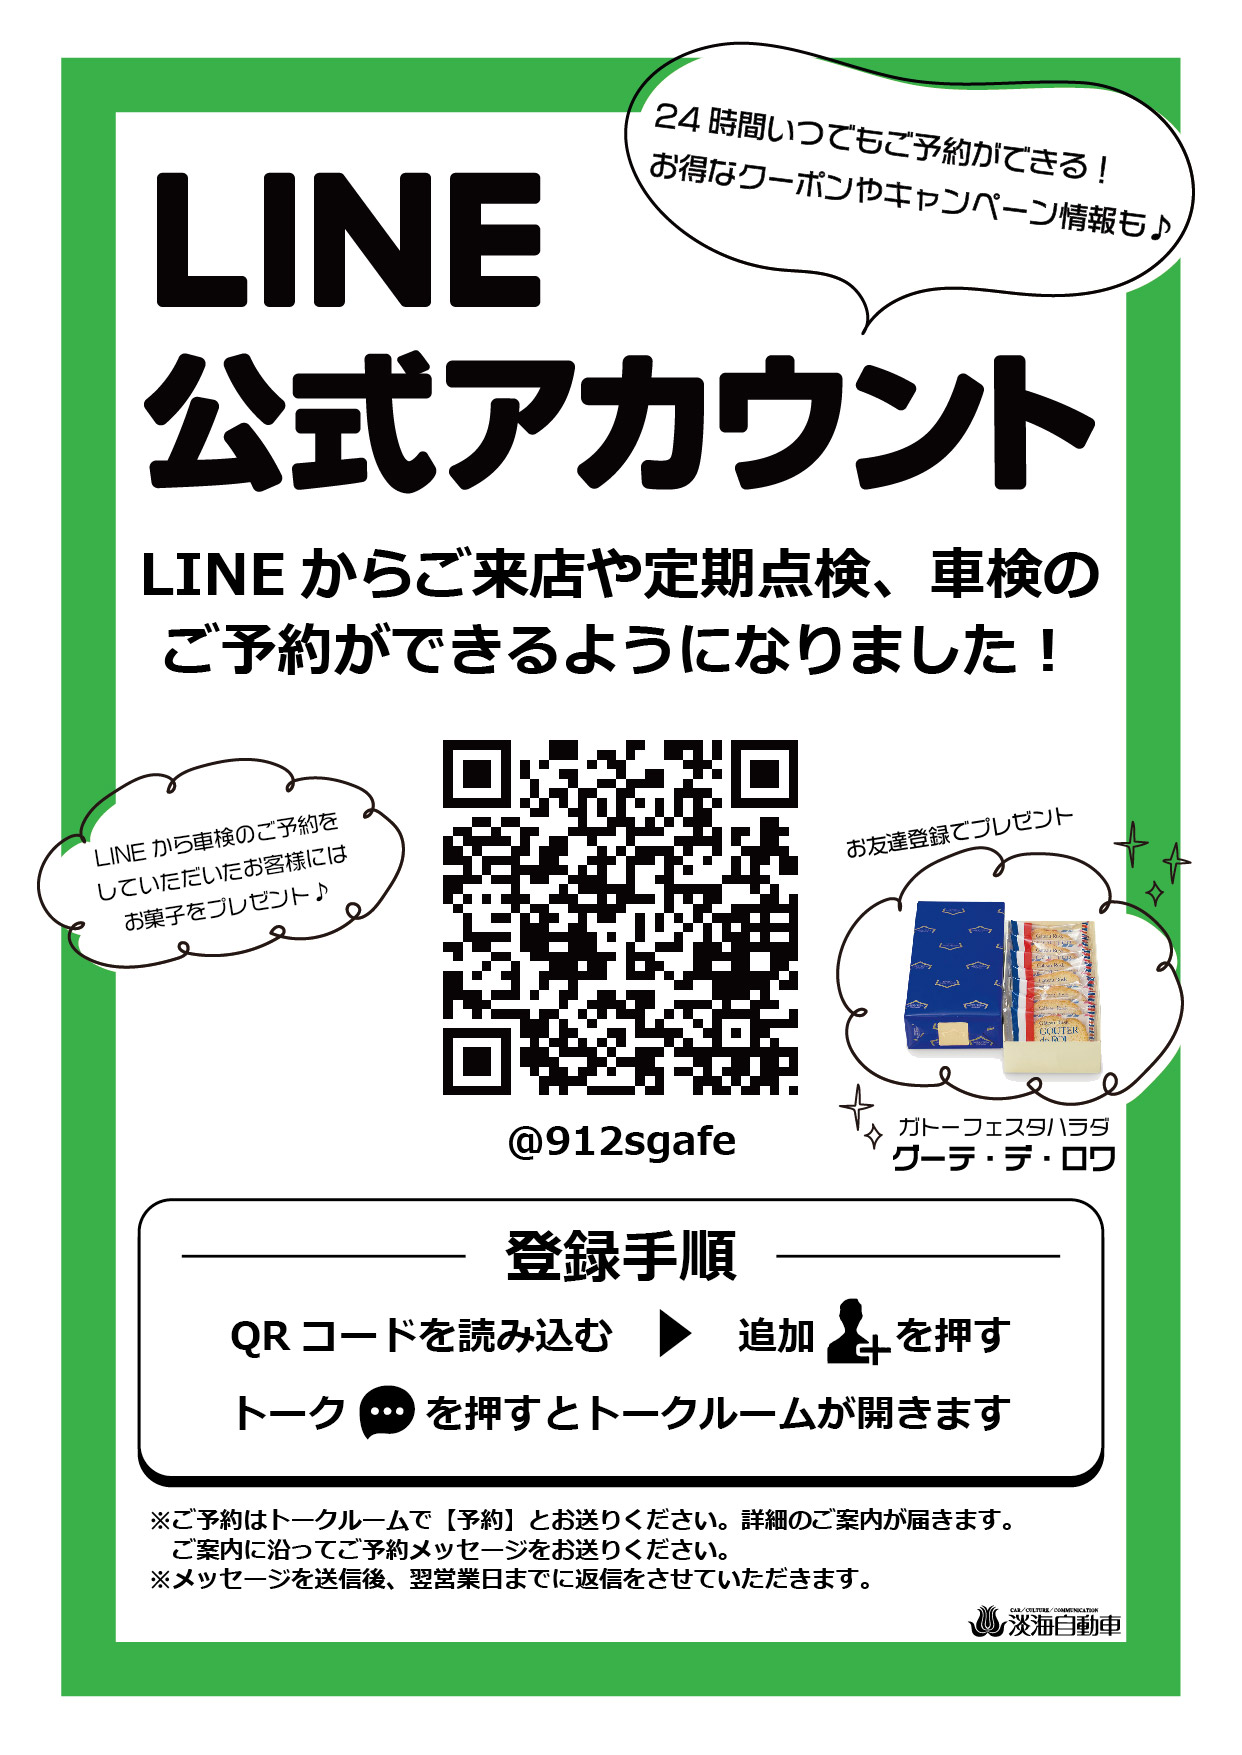 LINE案内_211030_アートボード 1